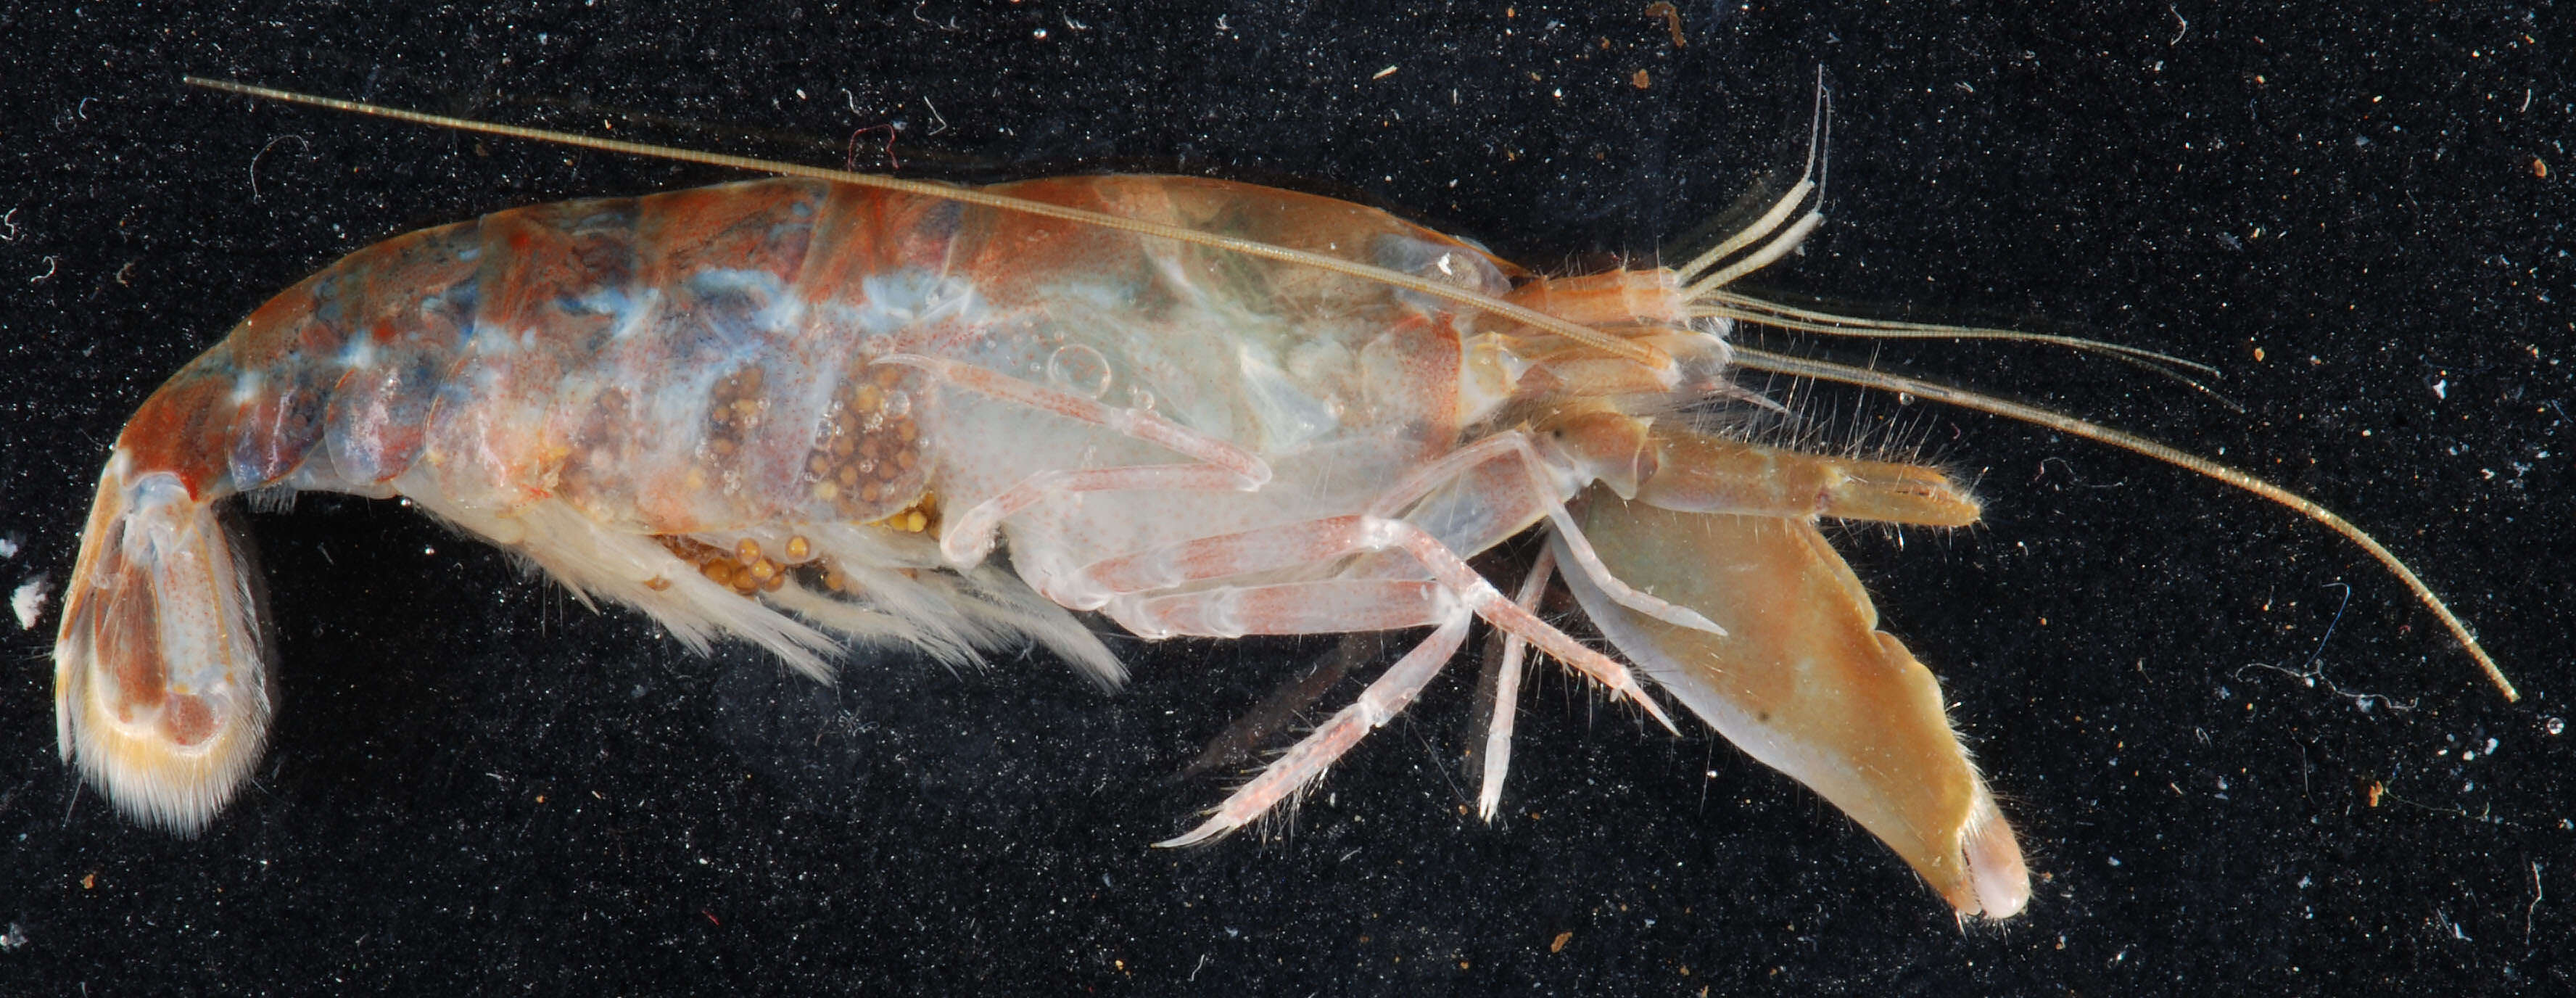 Image of bigclaw snapping shrimp